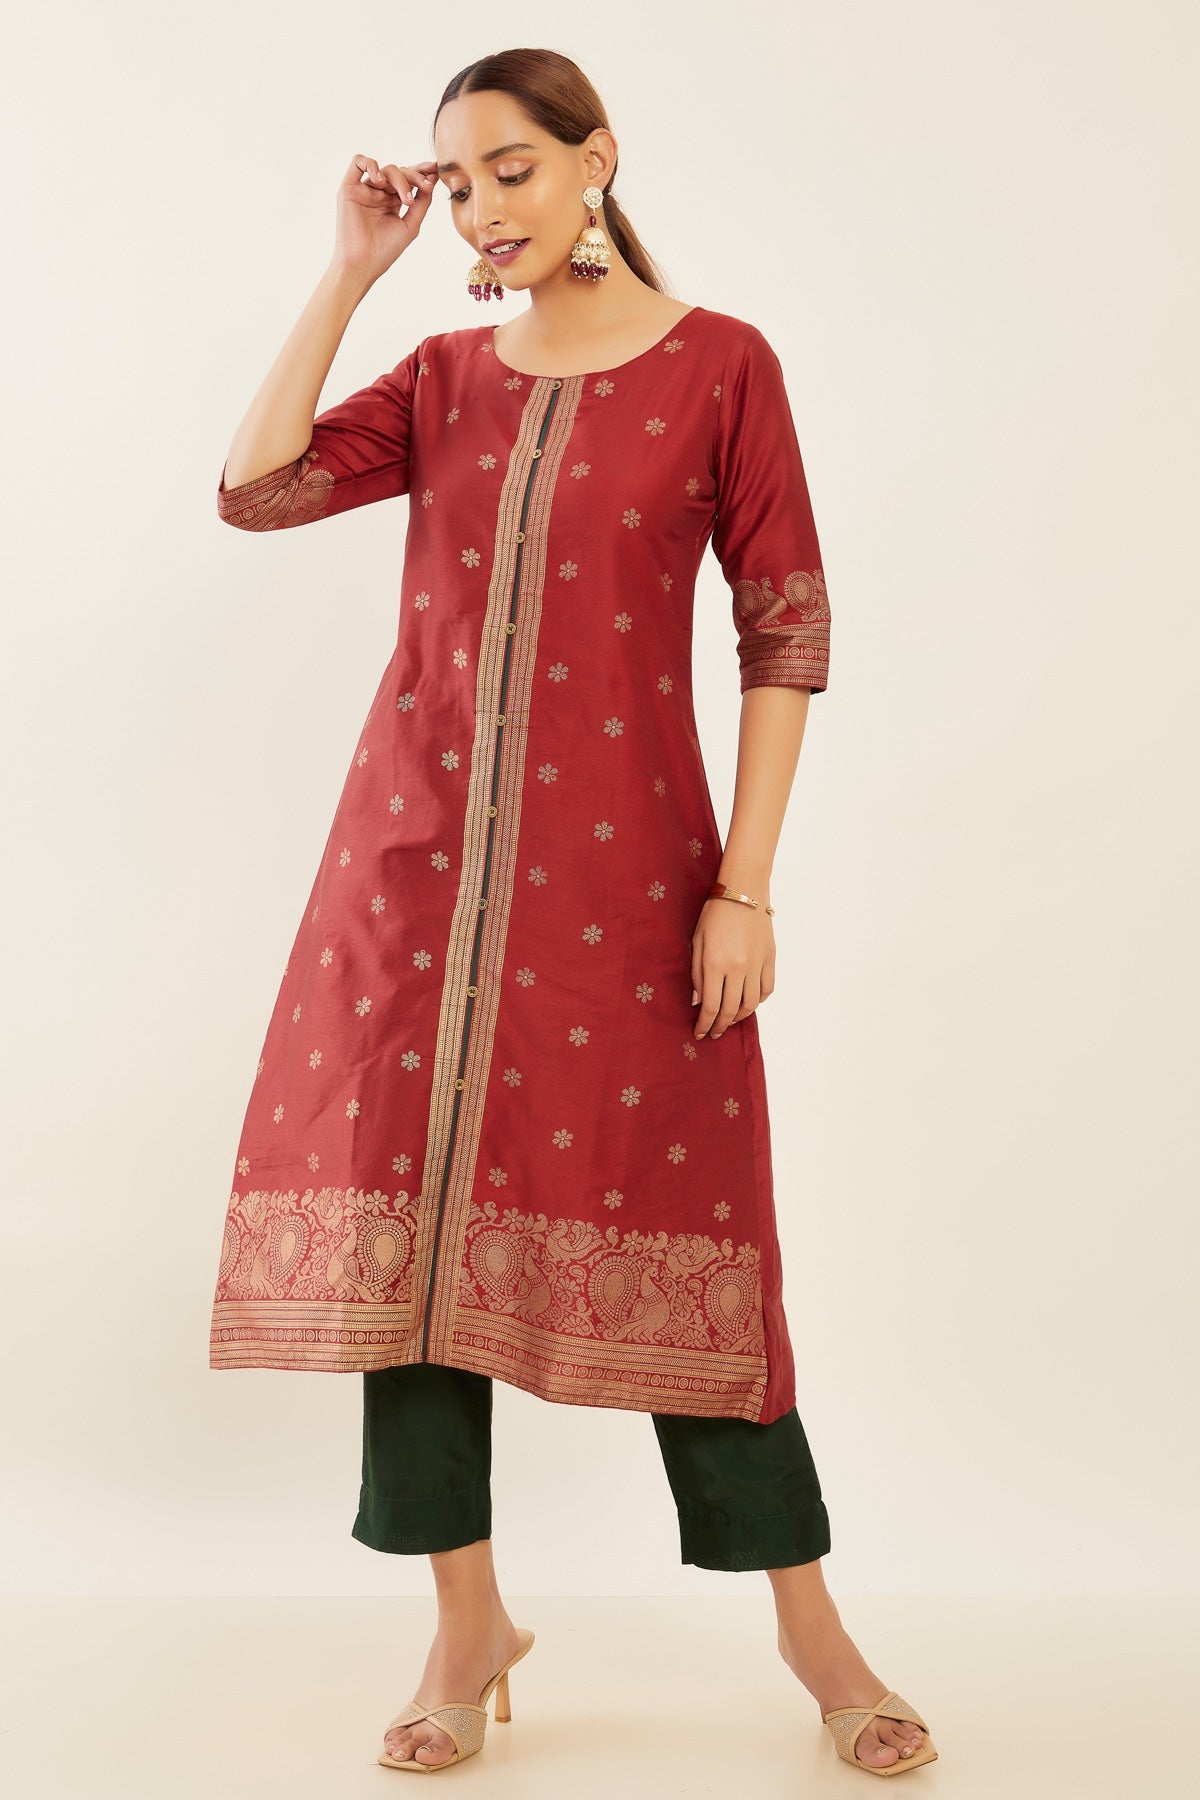 All Over Floral & Peacock Motif Printed A-Line Kurta - Maroon